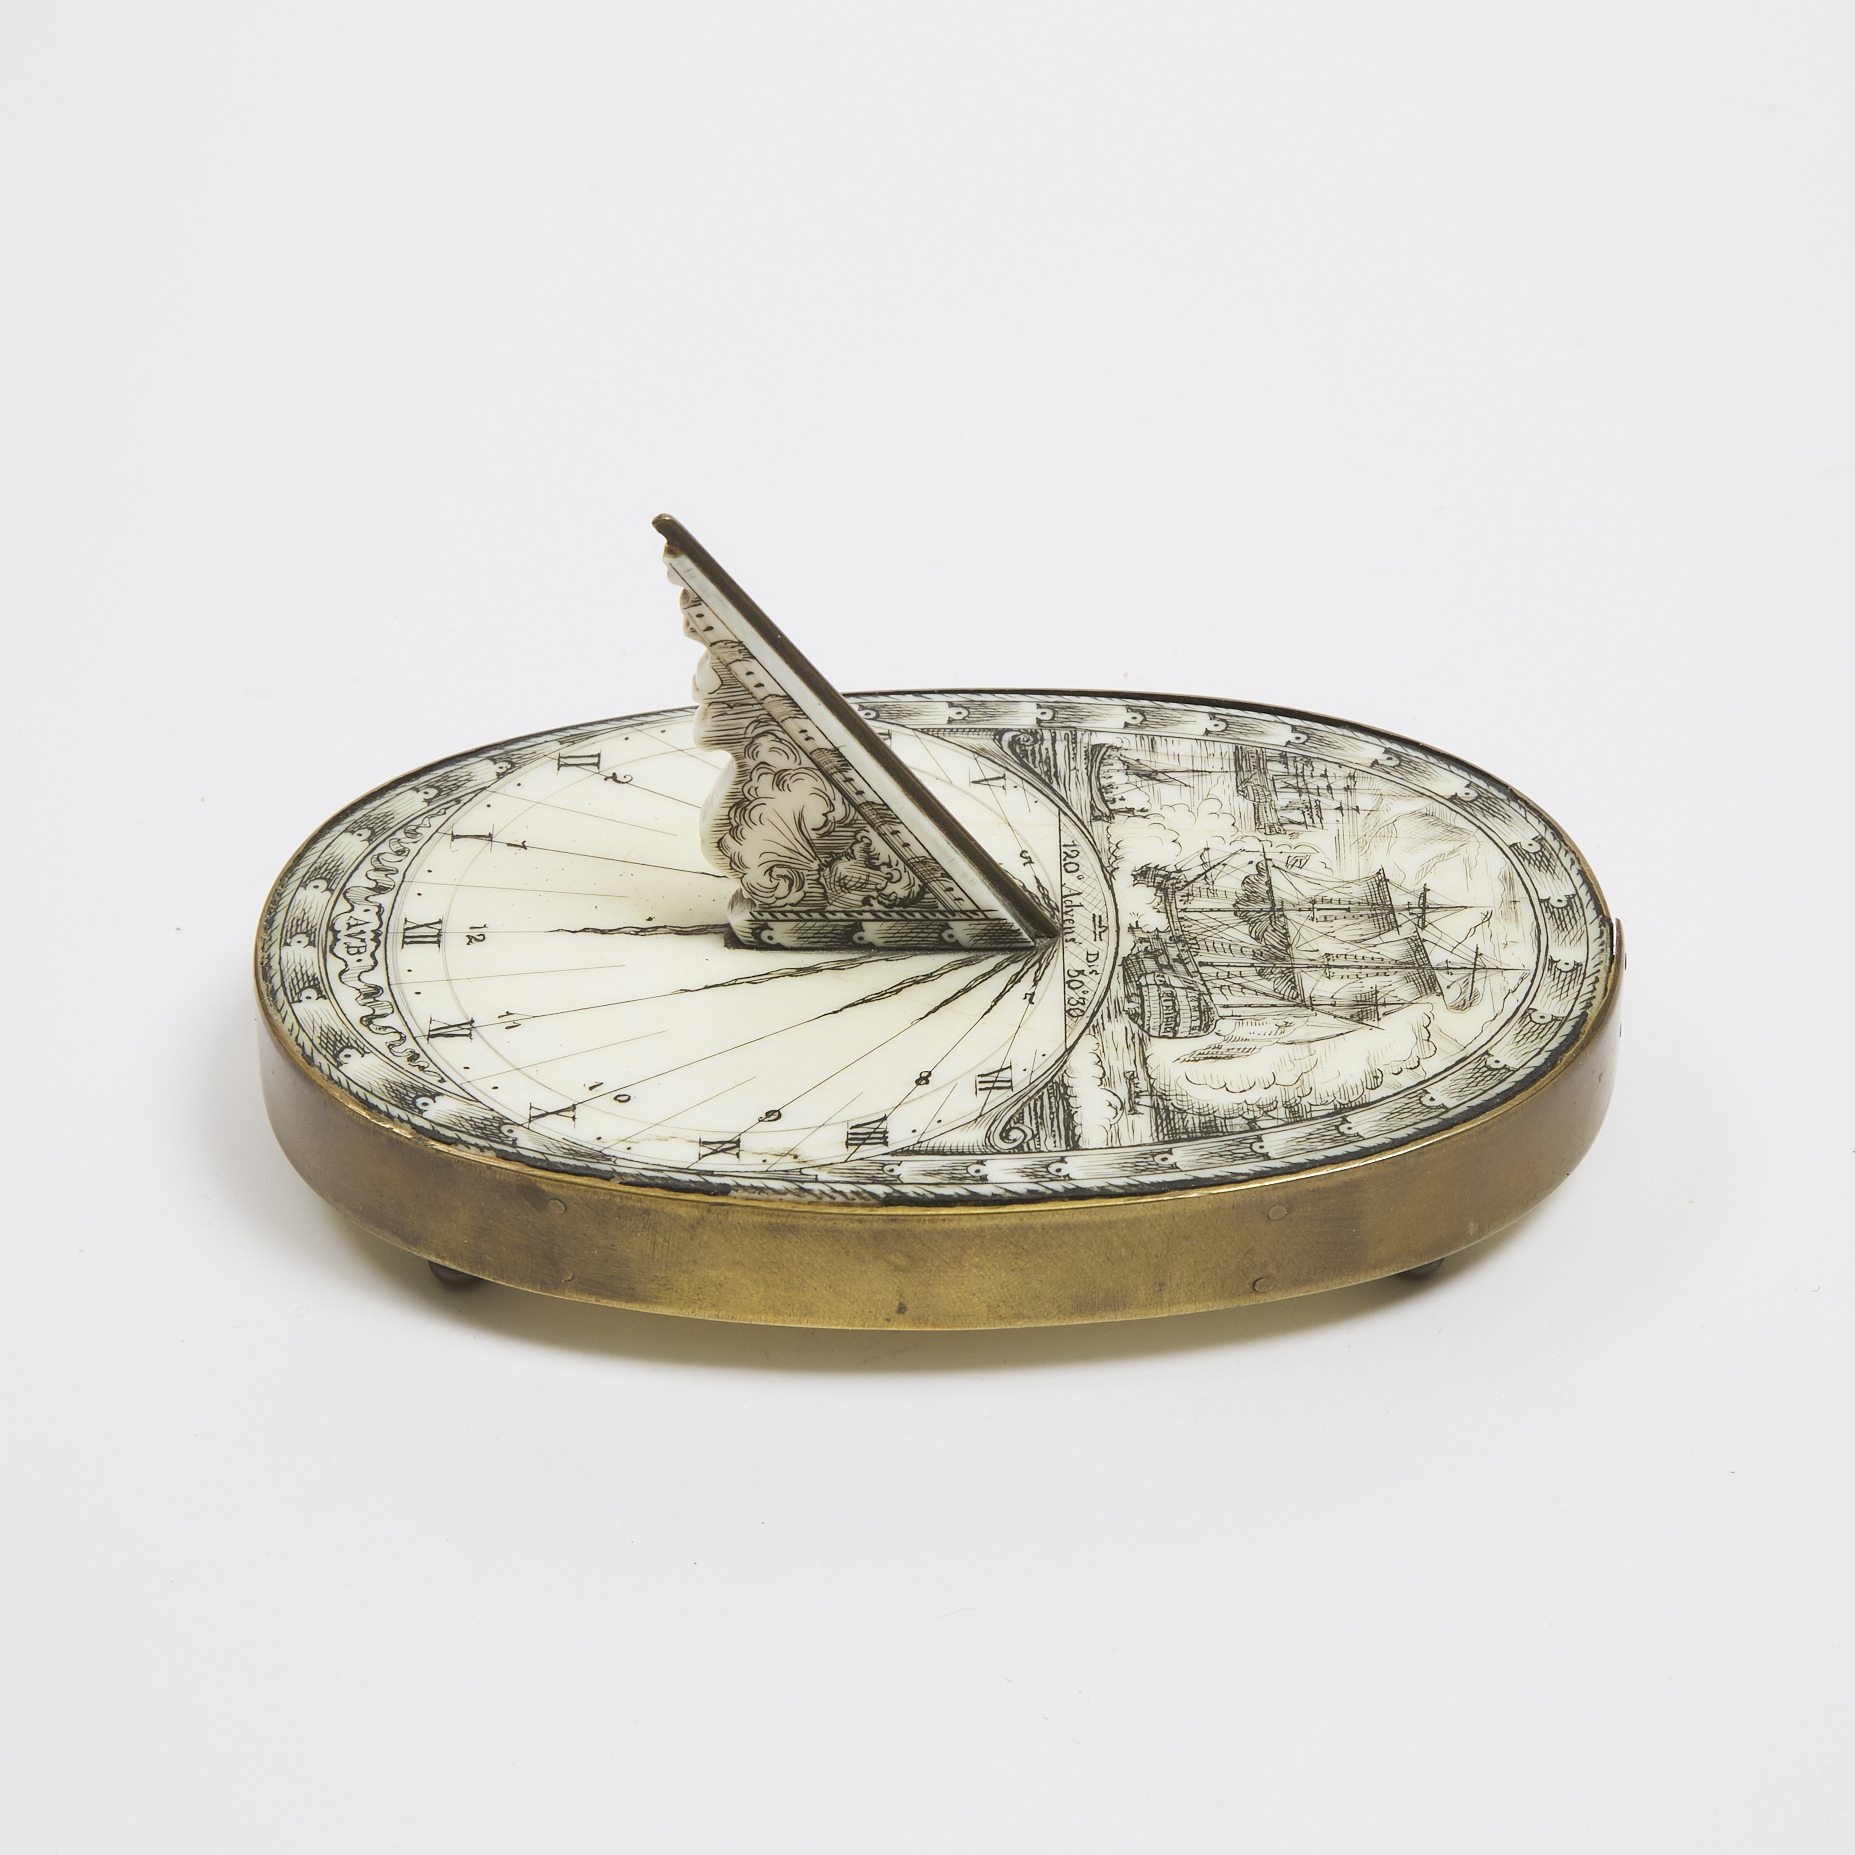 English Brass Mounted Engraved Ivory Desk Top Sundial, late 19th century